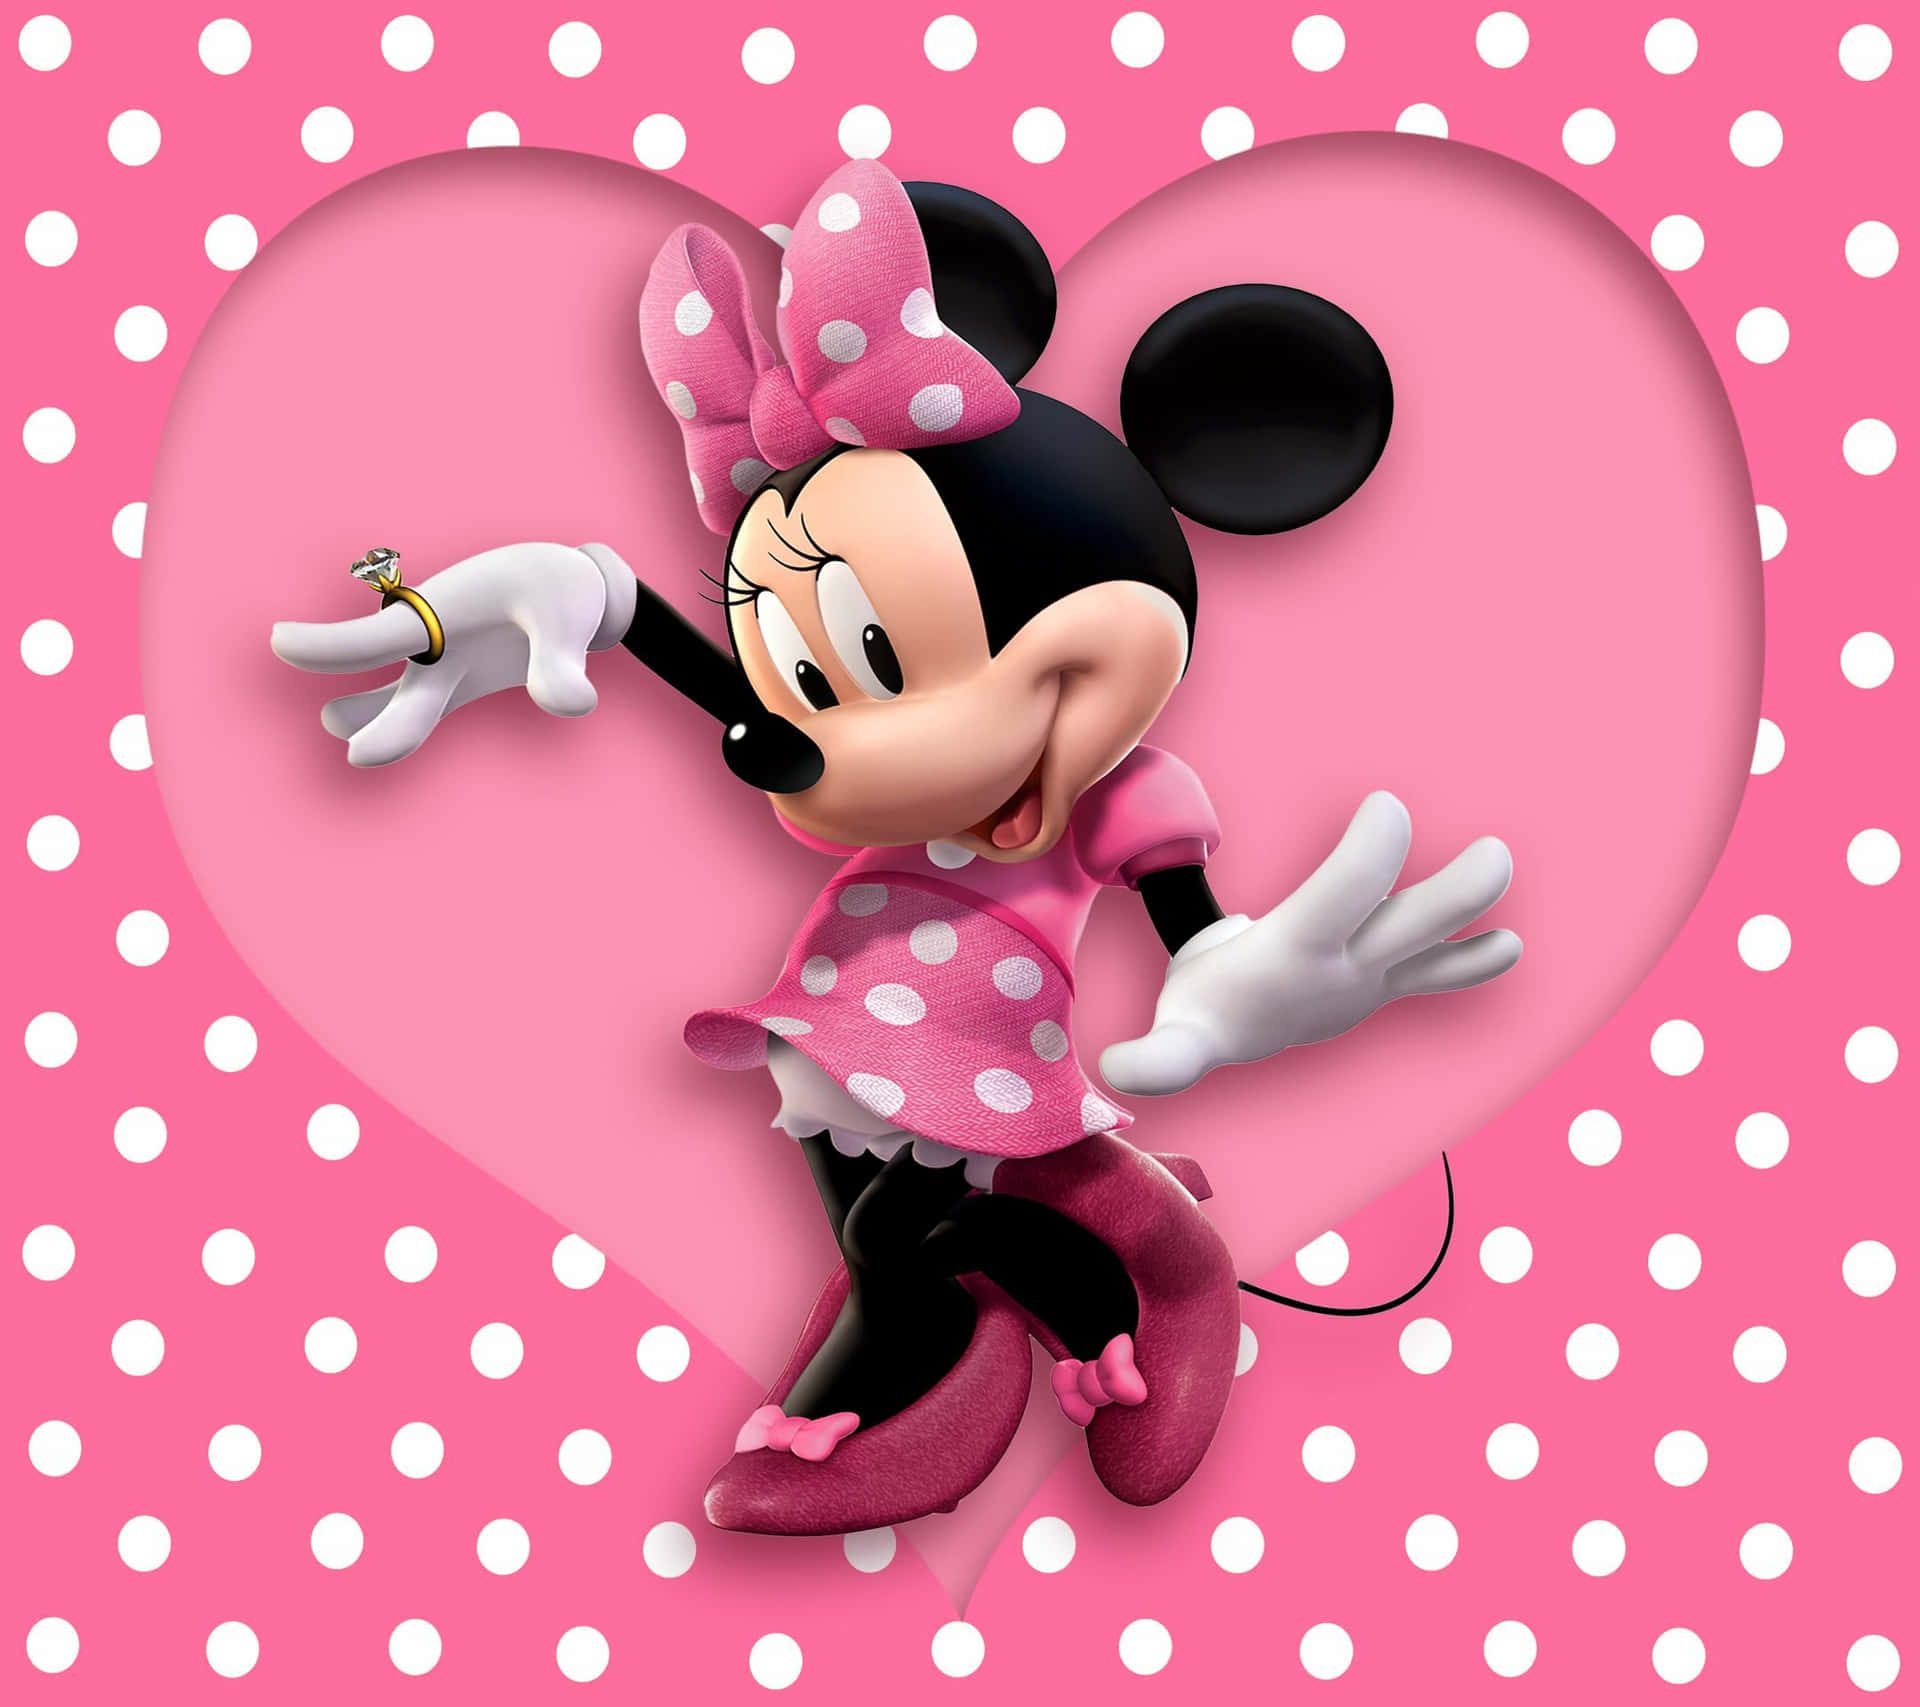 Minnie Mouse Posing In a Cheerful Outfit